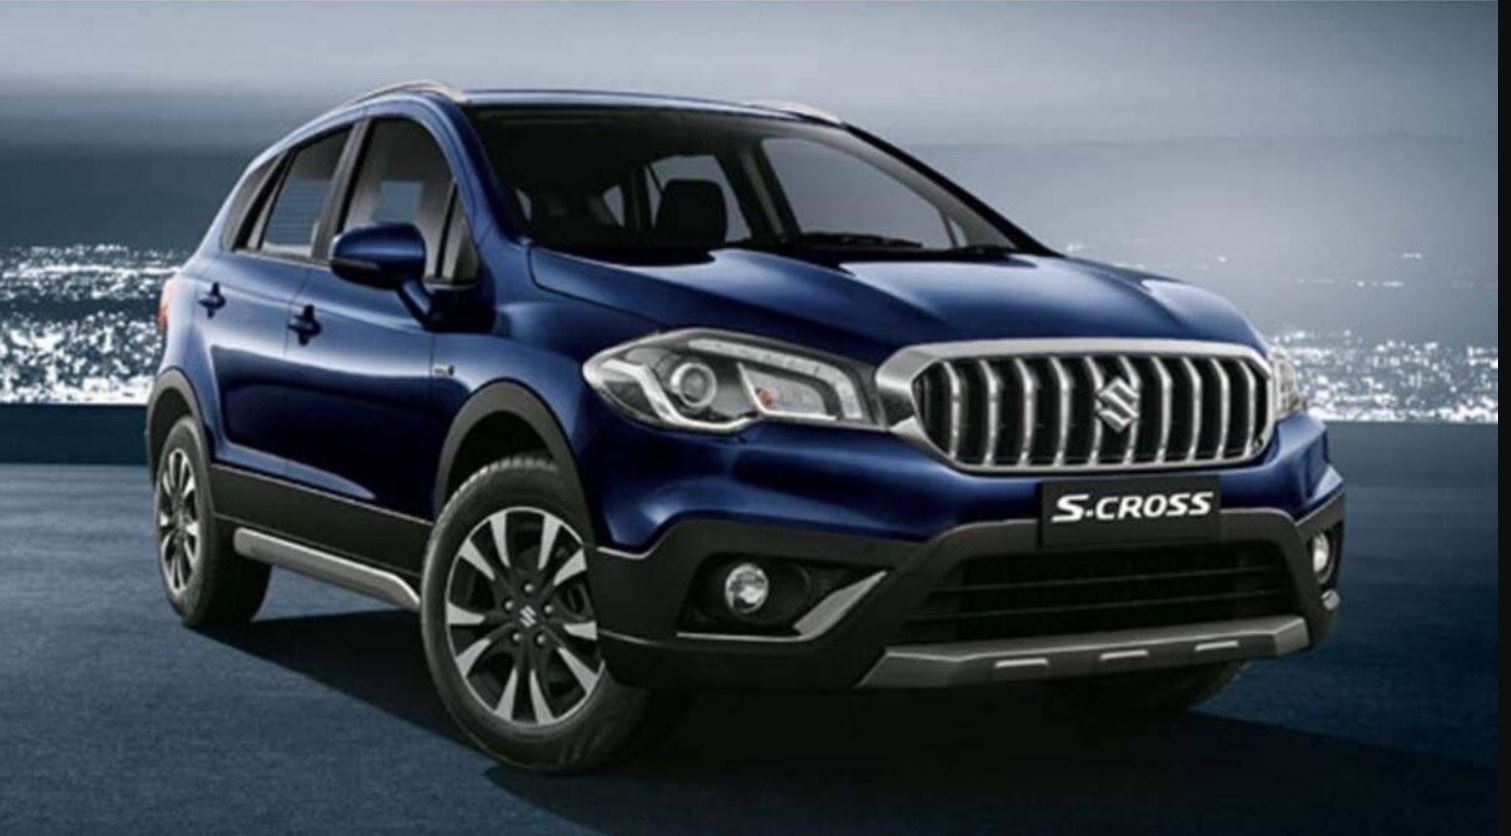 Maruti Suzuki S Cross Zero Unit Sale In July Even After Heavy Discount Offered By Company